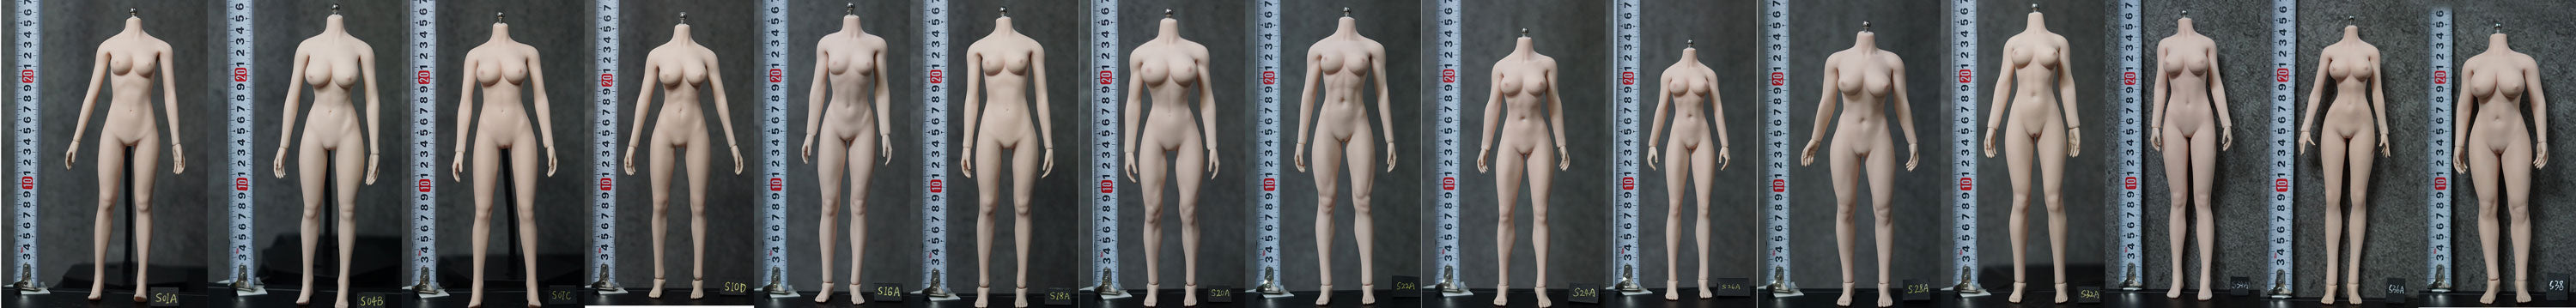 body - TBLeague / Phicen Seamless Bodies with Steel Skeleton Catalog (updated continually) - Page 3 7a89d1c4b5ac10d6f47c3bbfbc50e49e